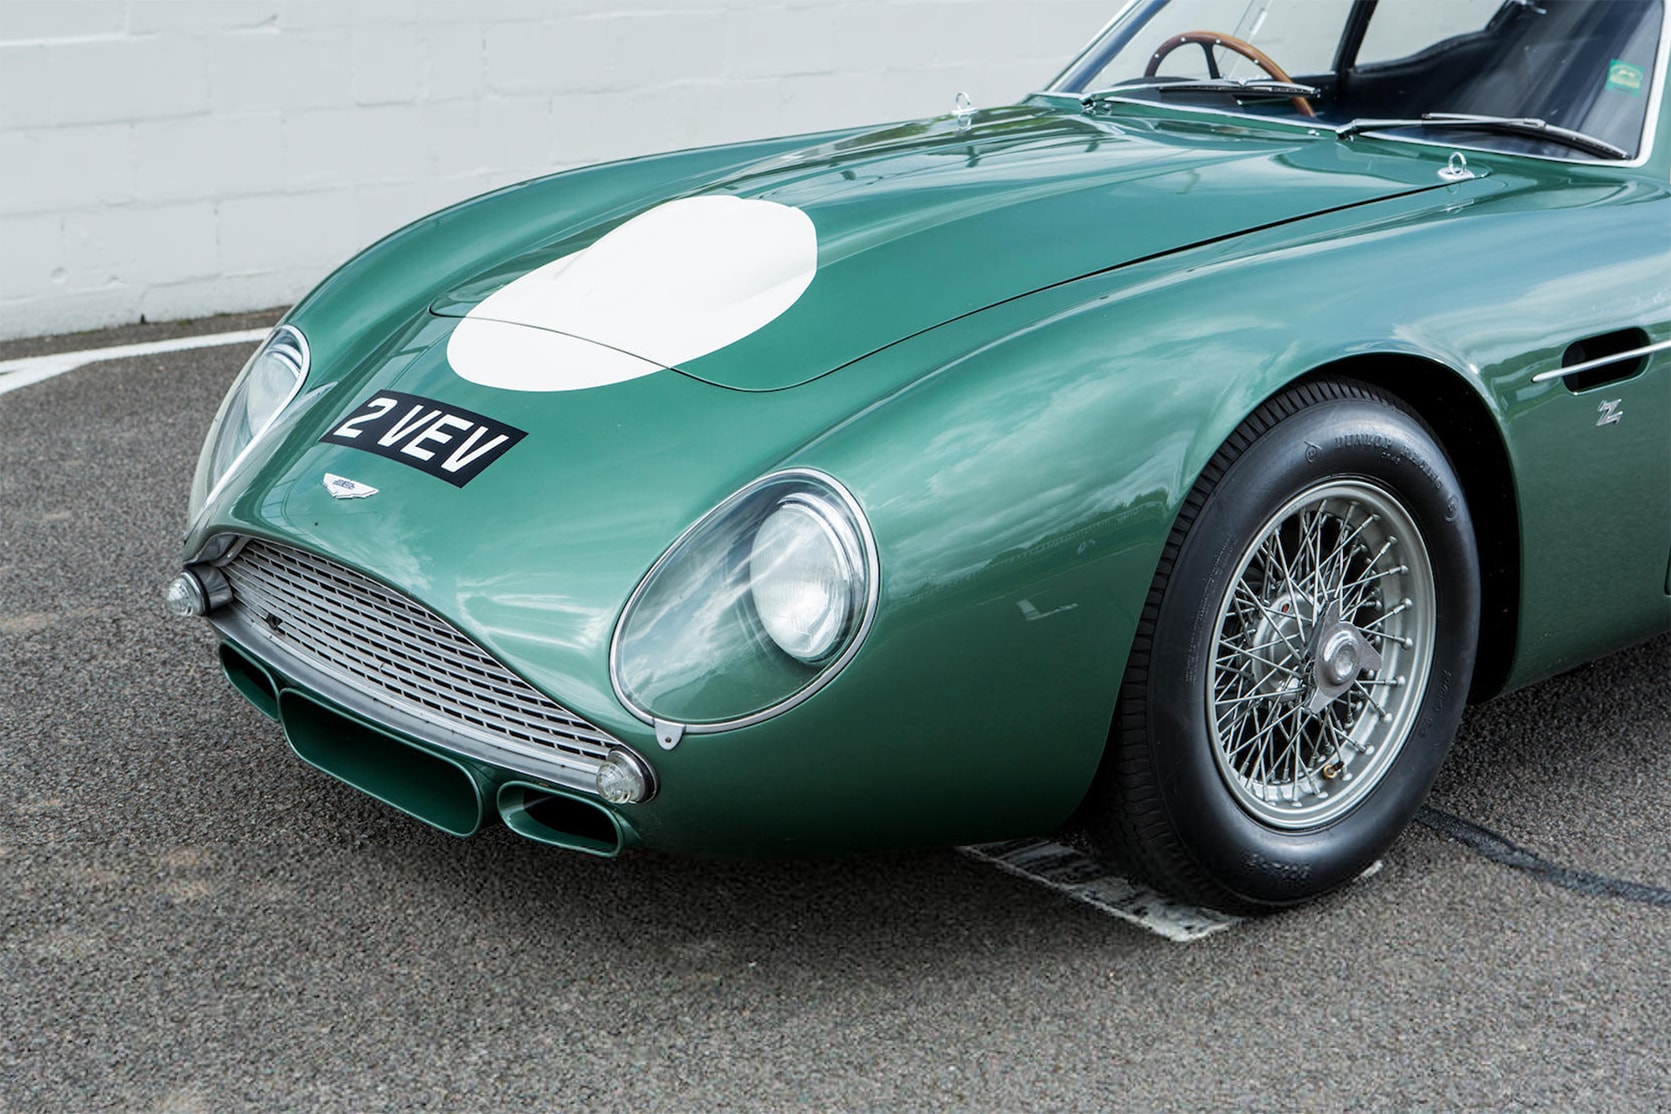 Aston Martin 'MP209' DB4GT ZAGATO Auction For Sale Most Expensive British Car Ever Sold Europe Luxury Car Rental